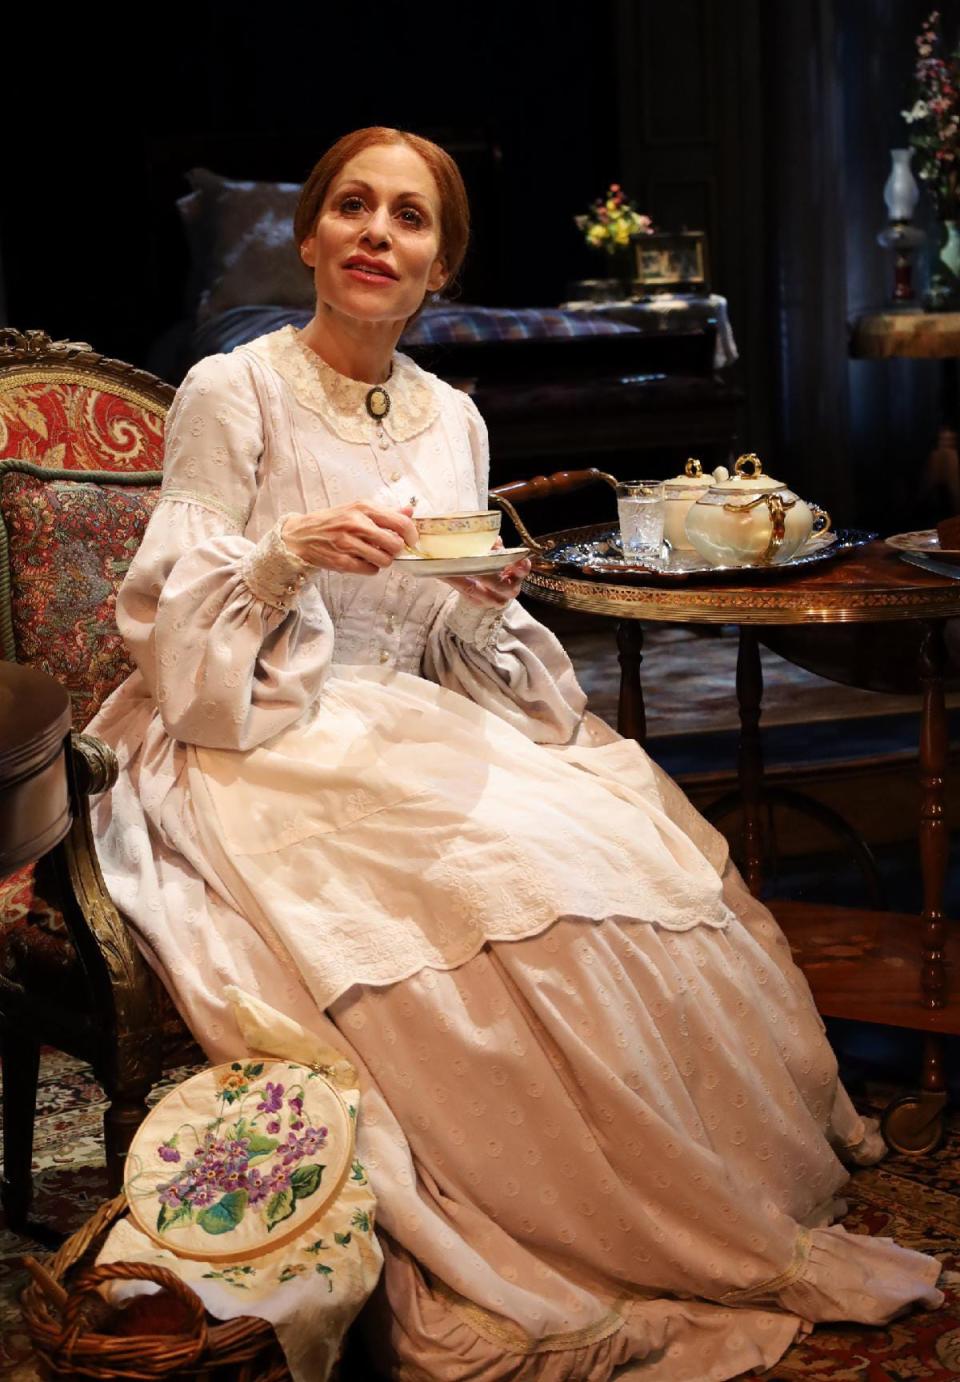 Head out to see the final performances of “The Belle of Amherst” at Palm Beach Dramaworks this weekend, featuring Margery Lowe as Emily Dickinson.